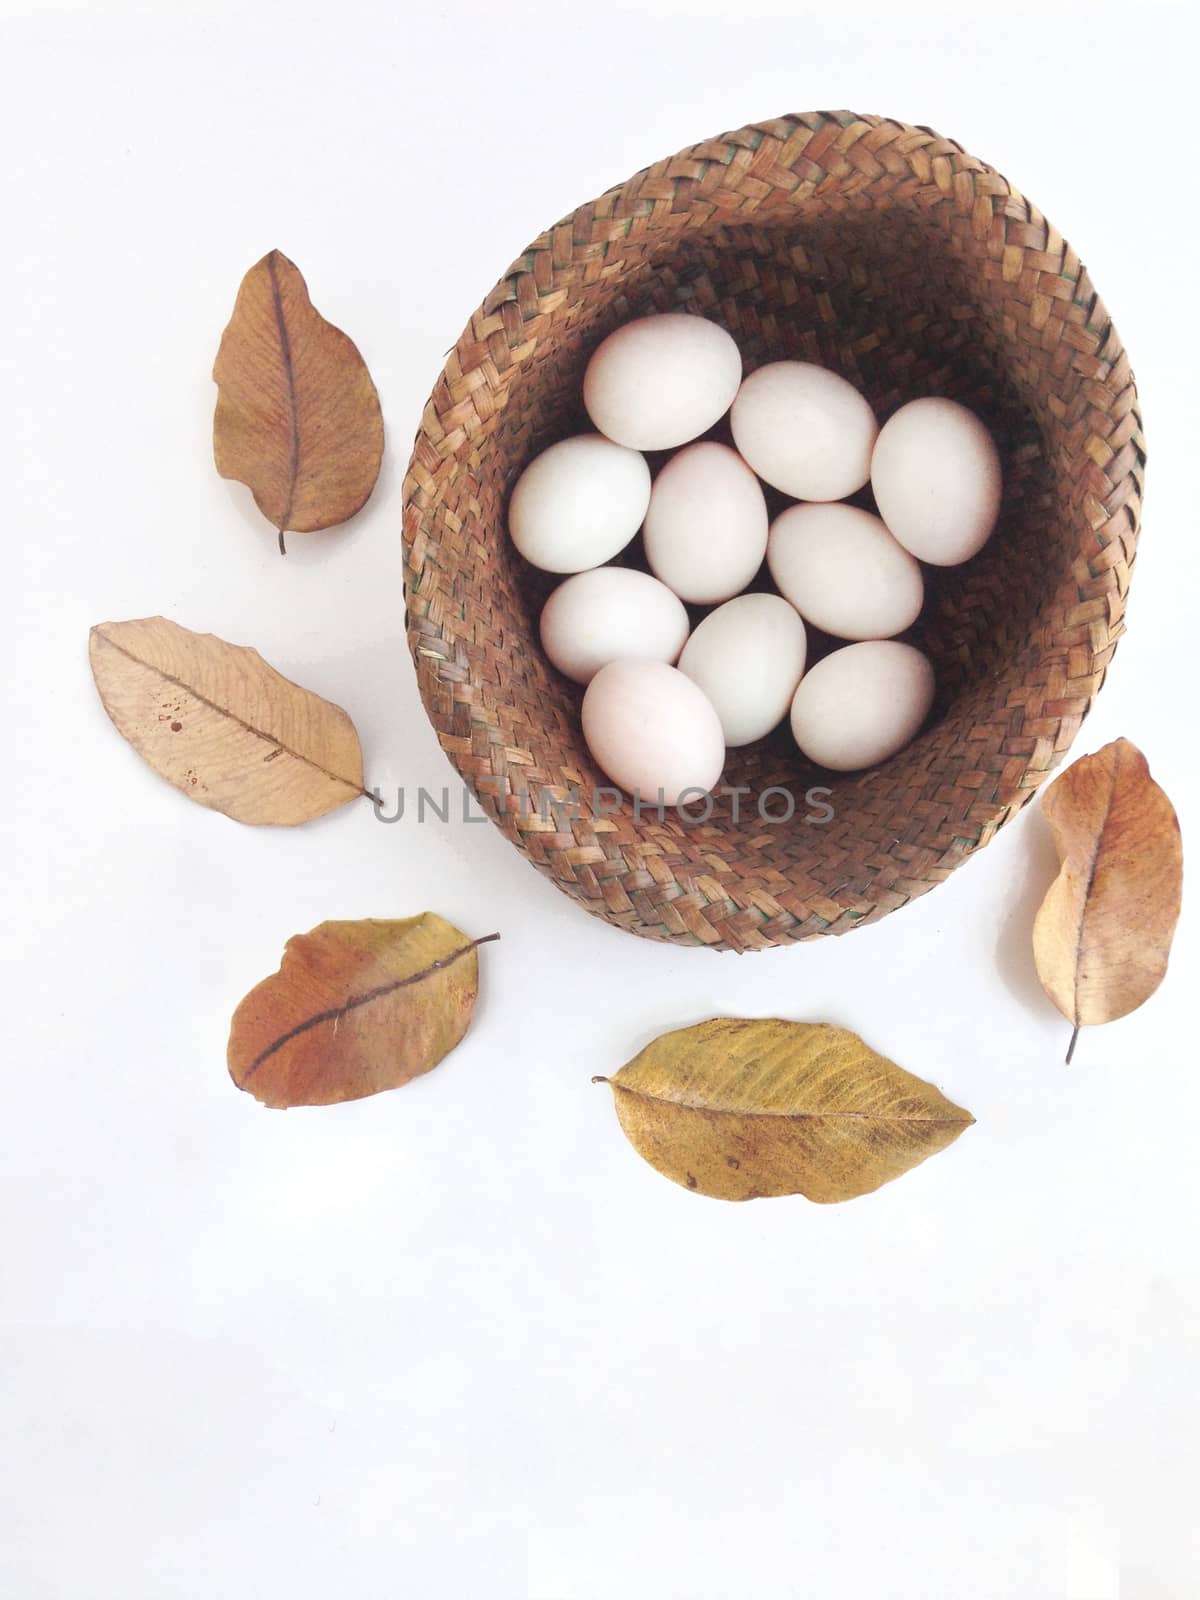 duck egg on bastket with dry leaf by Bowonpat